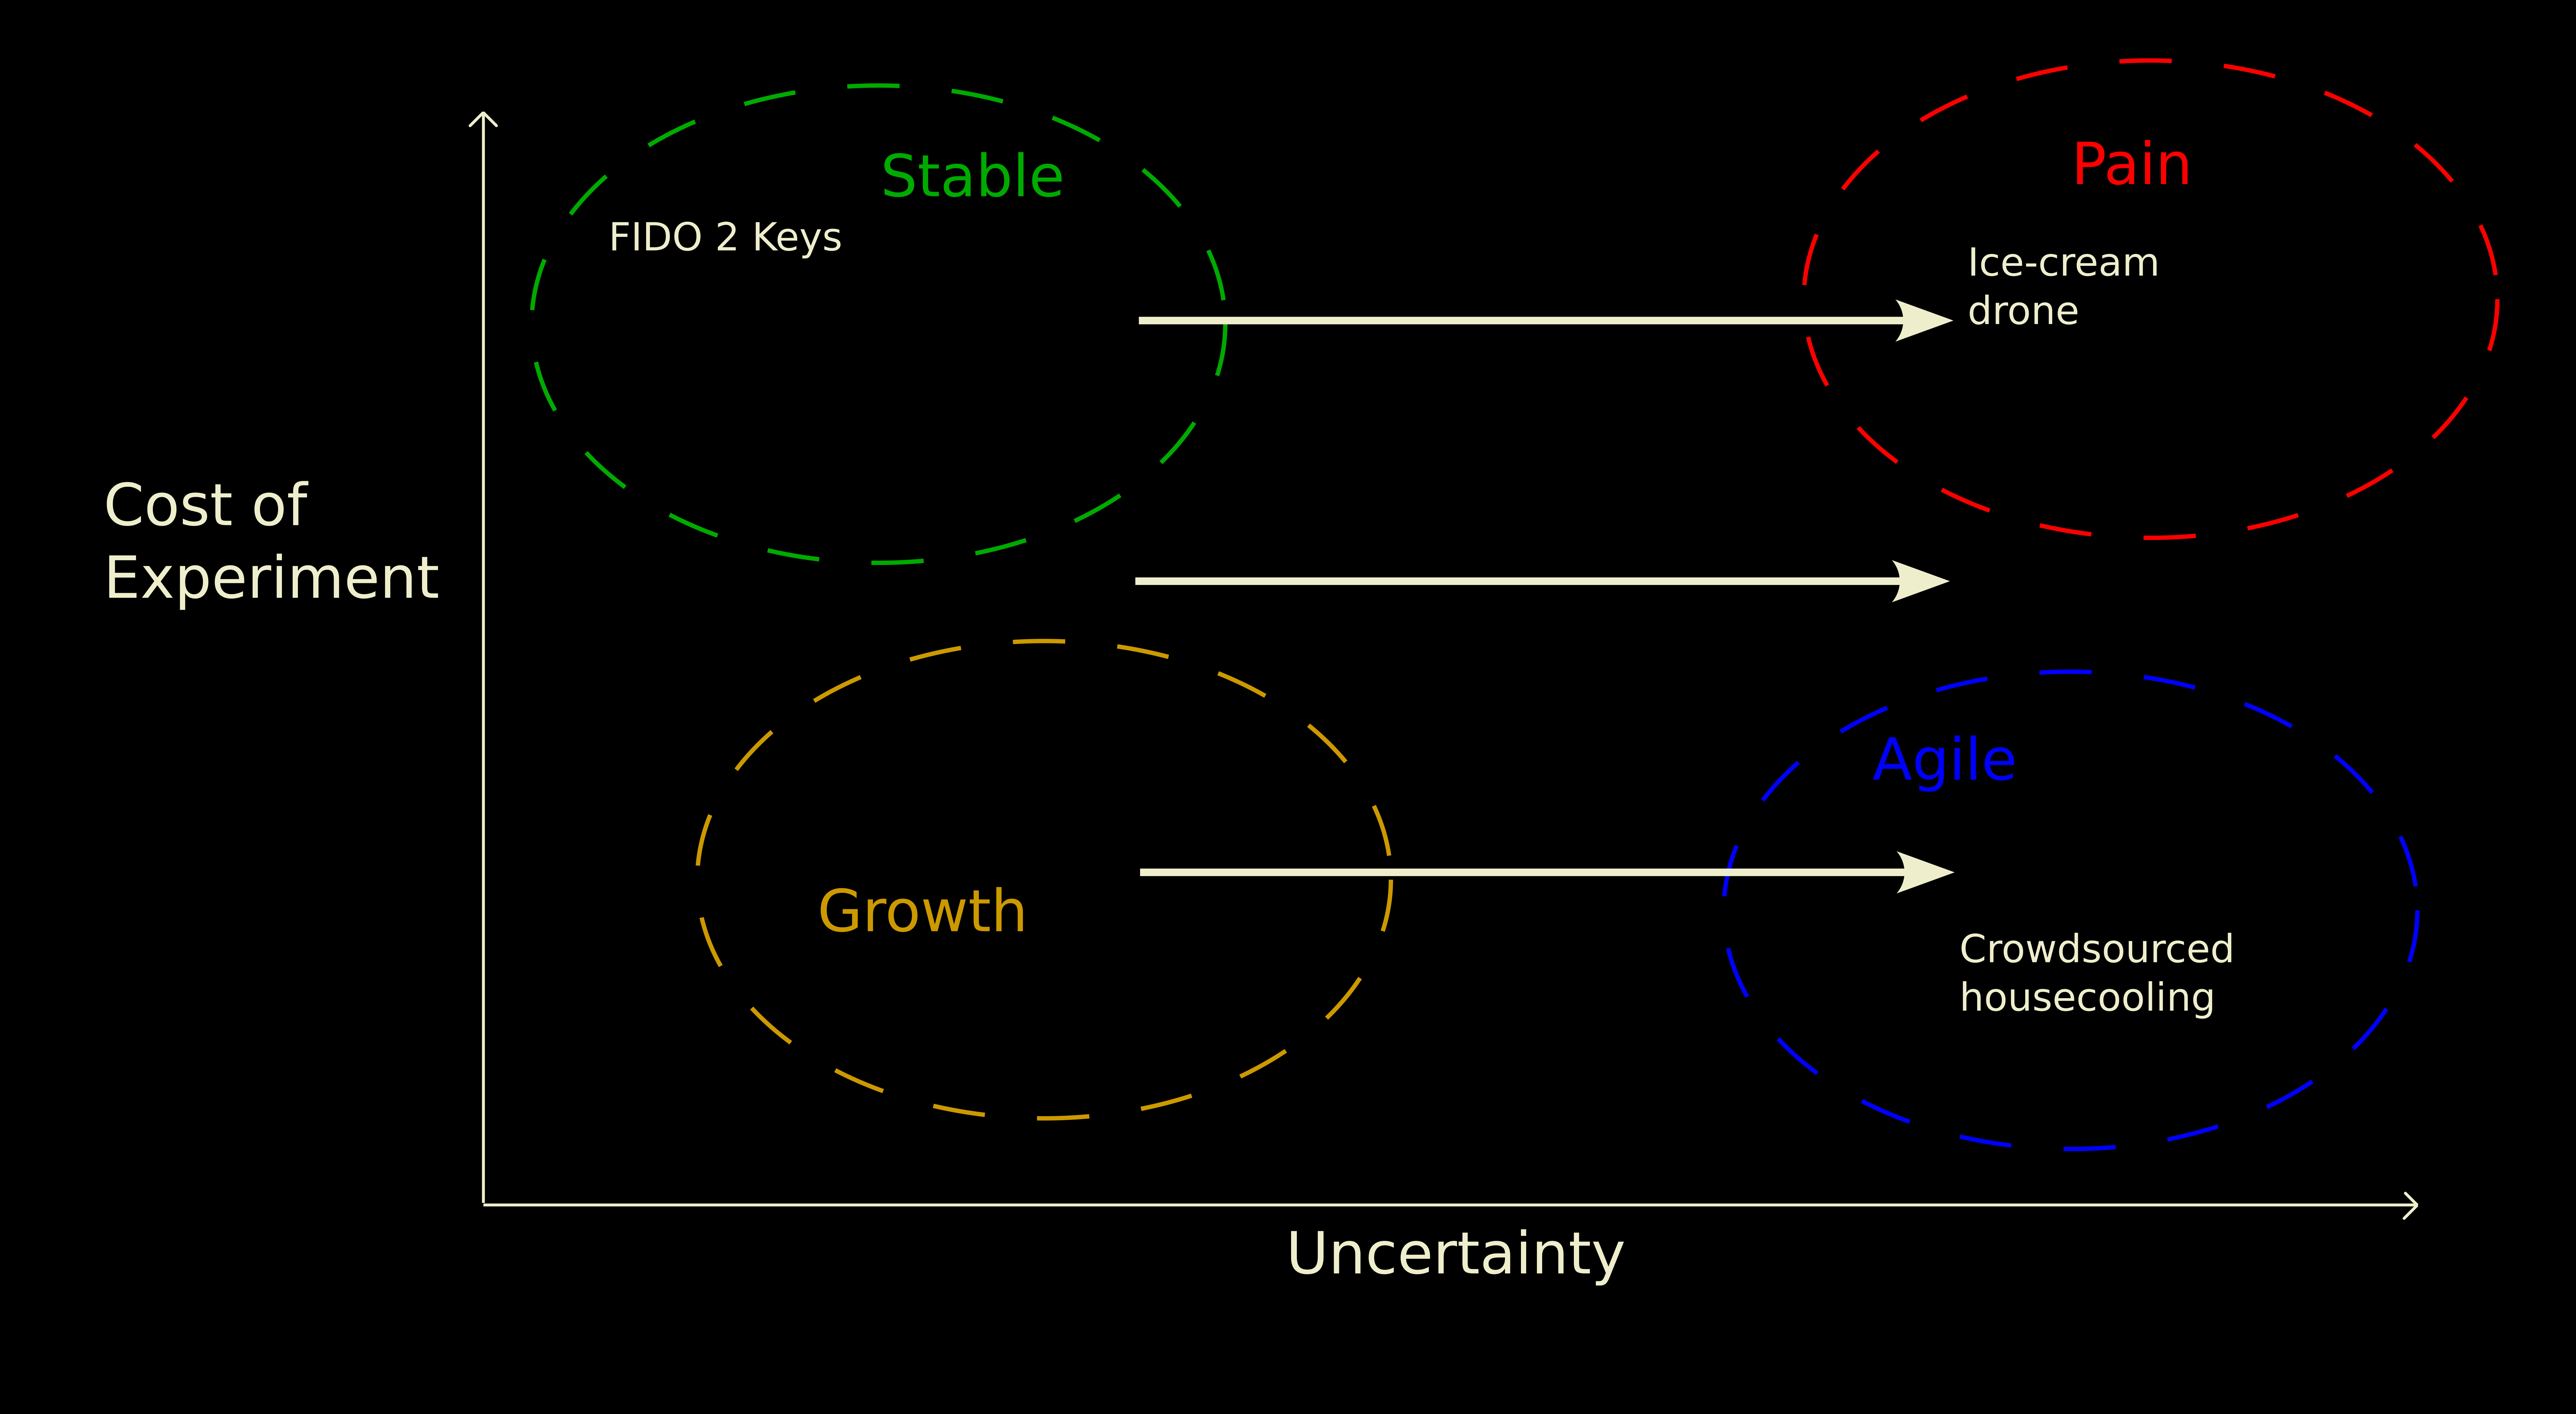 The same graph with arrows pointing right, towards more uncertainty. We can use them to move from the Growth zone in the bottom-left to the Agile zone in the bottom-right. But if we start in the Stable zone in the top-left, the same movement will take us to the world of Pain in th etop-right.